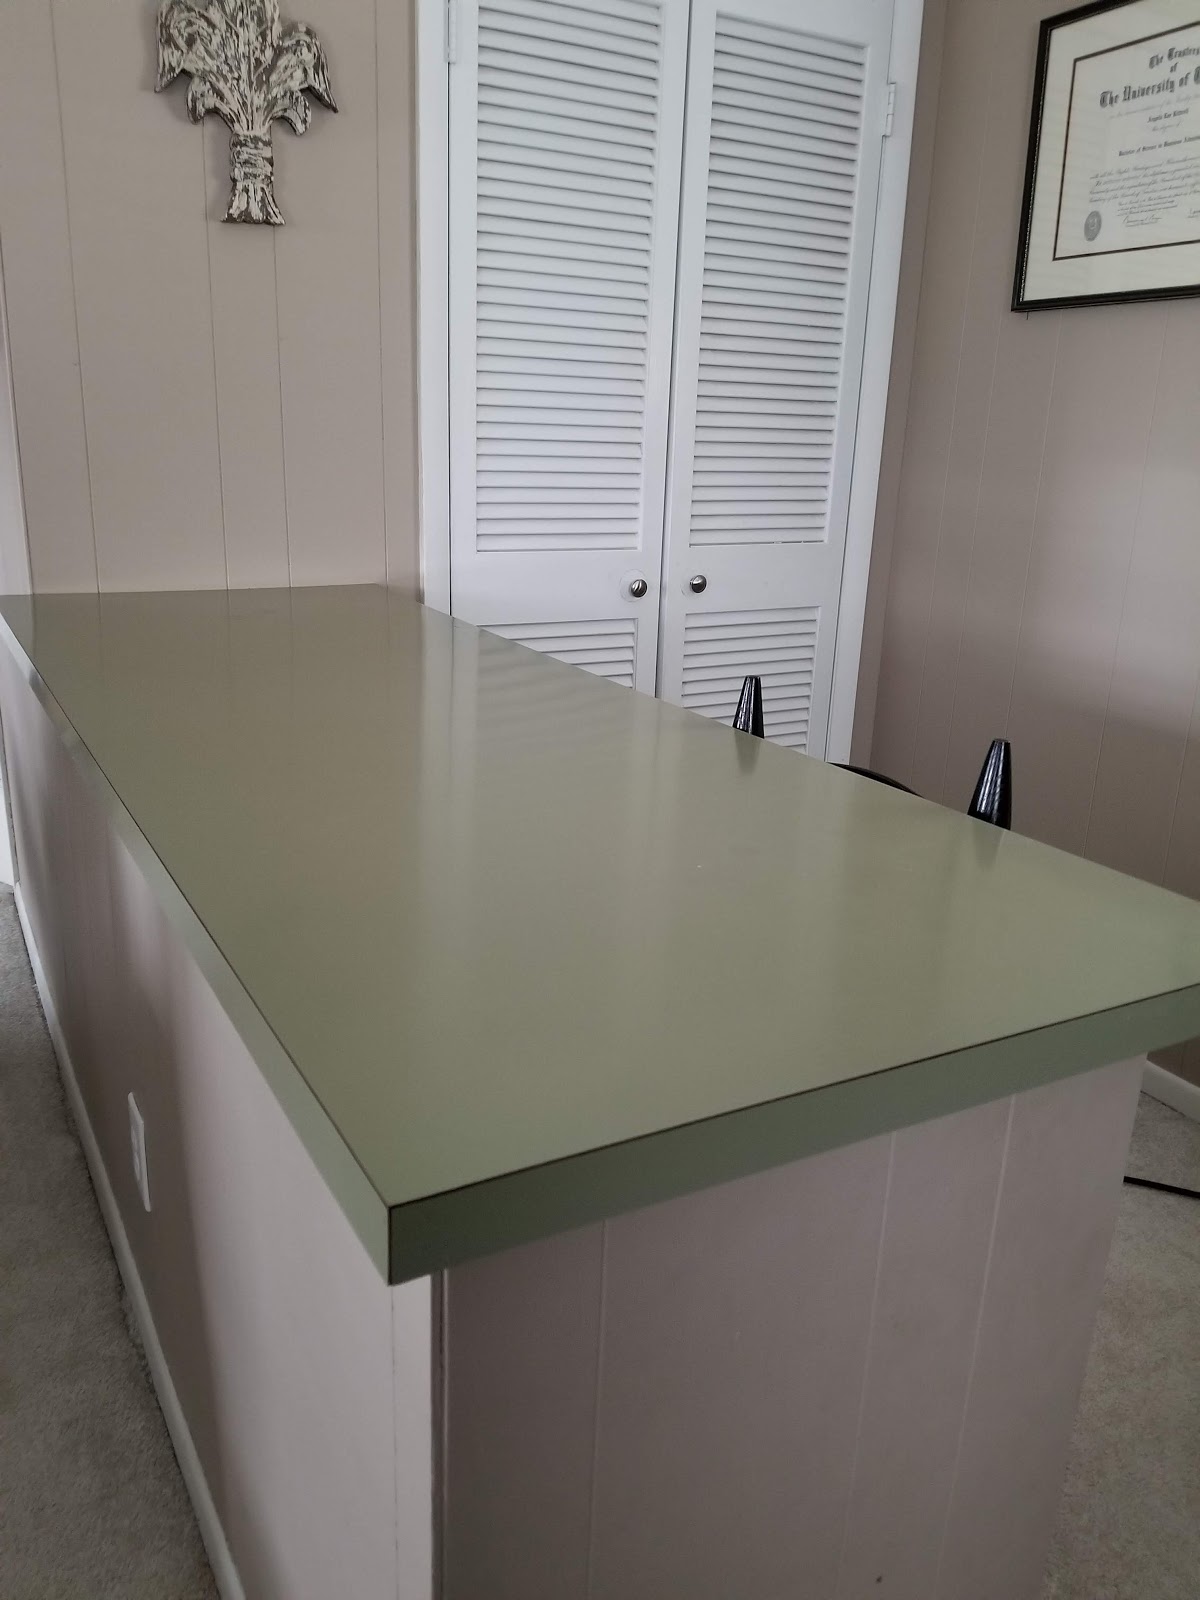 How I Updated A Countertop With Wood Look Contact Paper